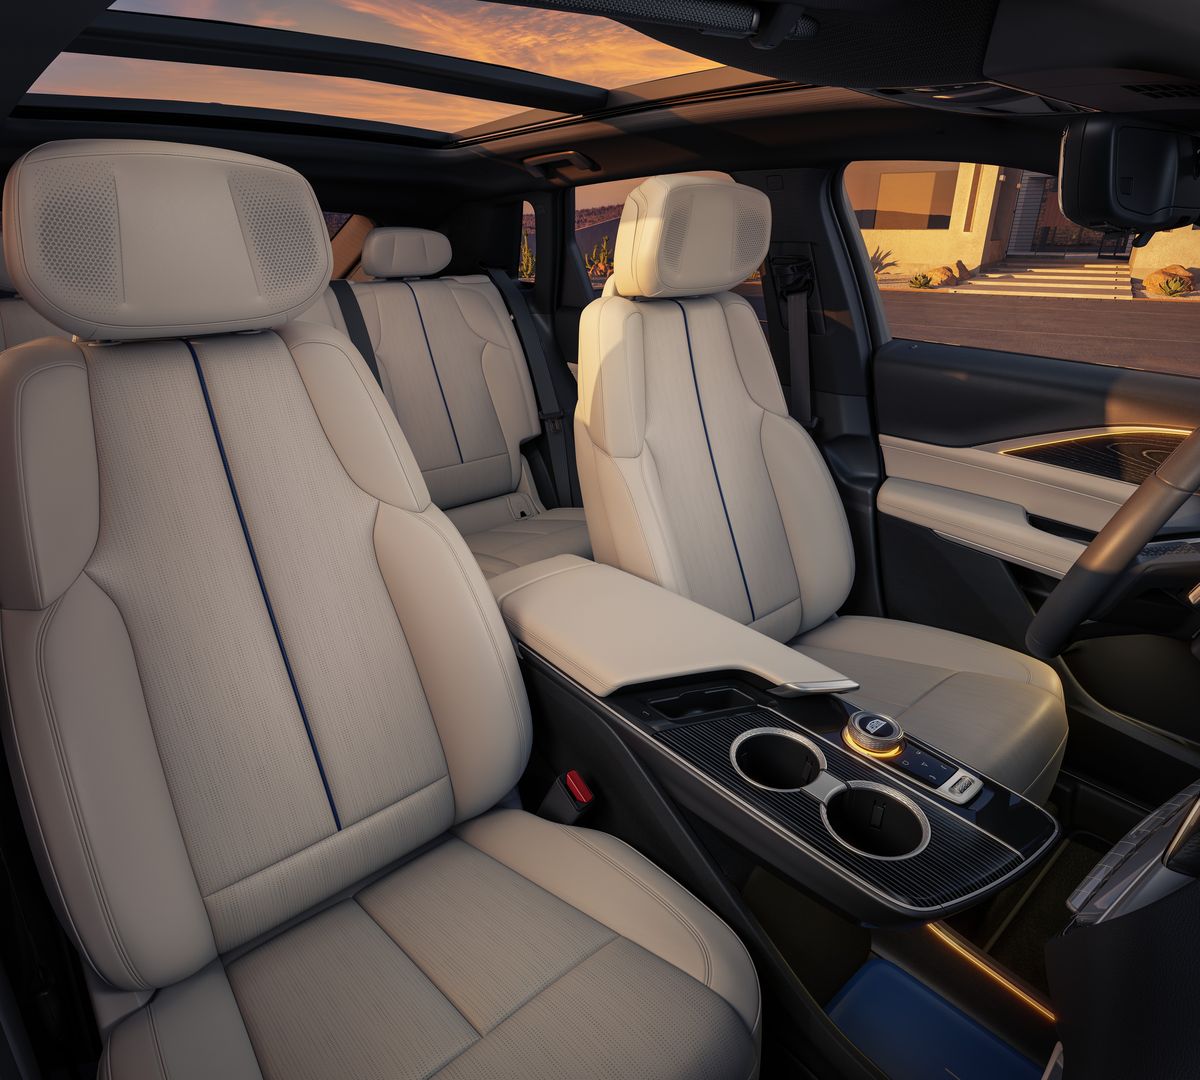 <p>GM has taken the luxurious interior of the <a href="https://www.roadandtrack.com/new-cars/future-cars/a33367242/cadillac-new-naming-scheme/">Cadillac Lyriq</a> quite seriously. The dash has a sleek curved 33-inch touchscreen display that complements all of the rich graphics. The Lyriq also provides a noise cancellation feature to lessen road noise so true audiophiles can really enjoy the 19 AKG surround sound speakers for a truly immersive listening experience.</p>